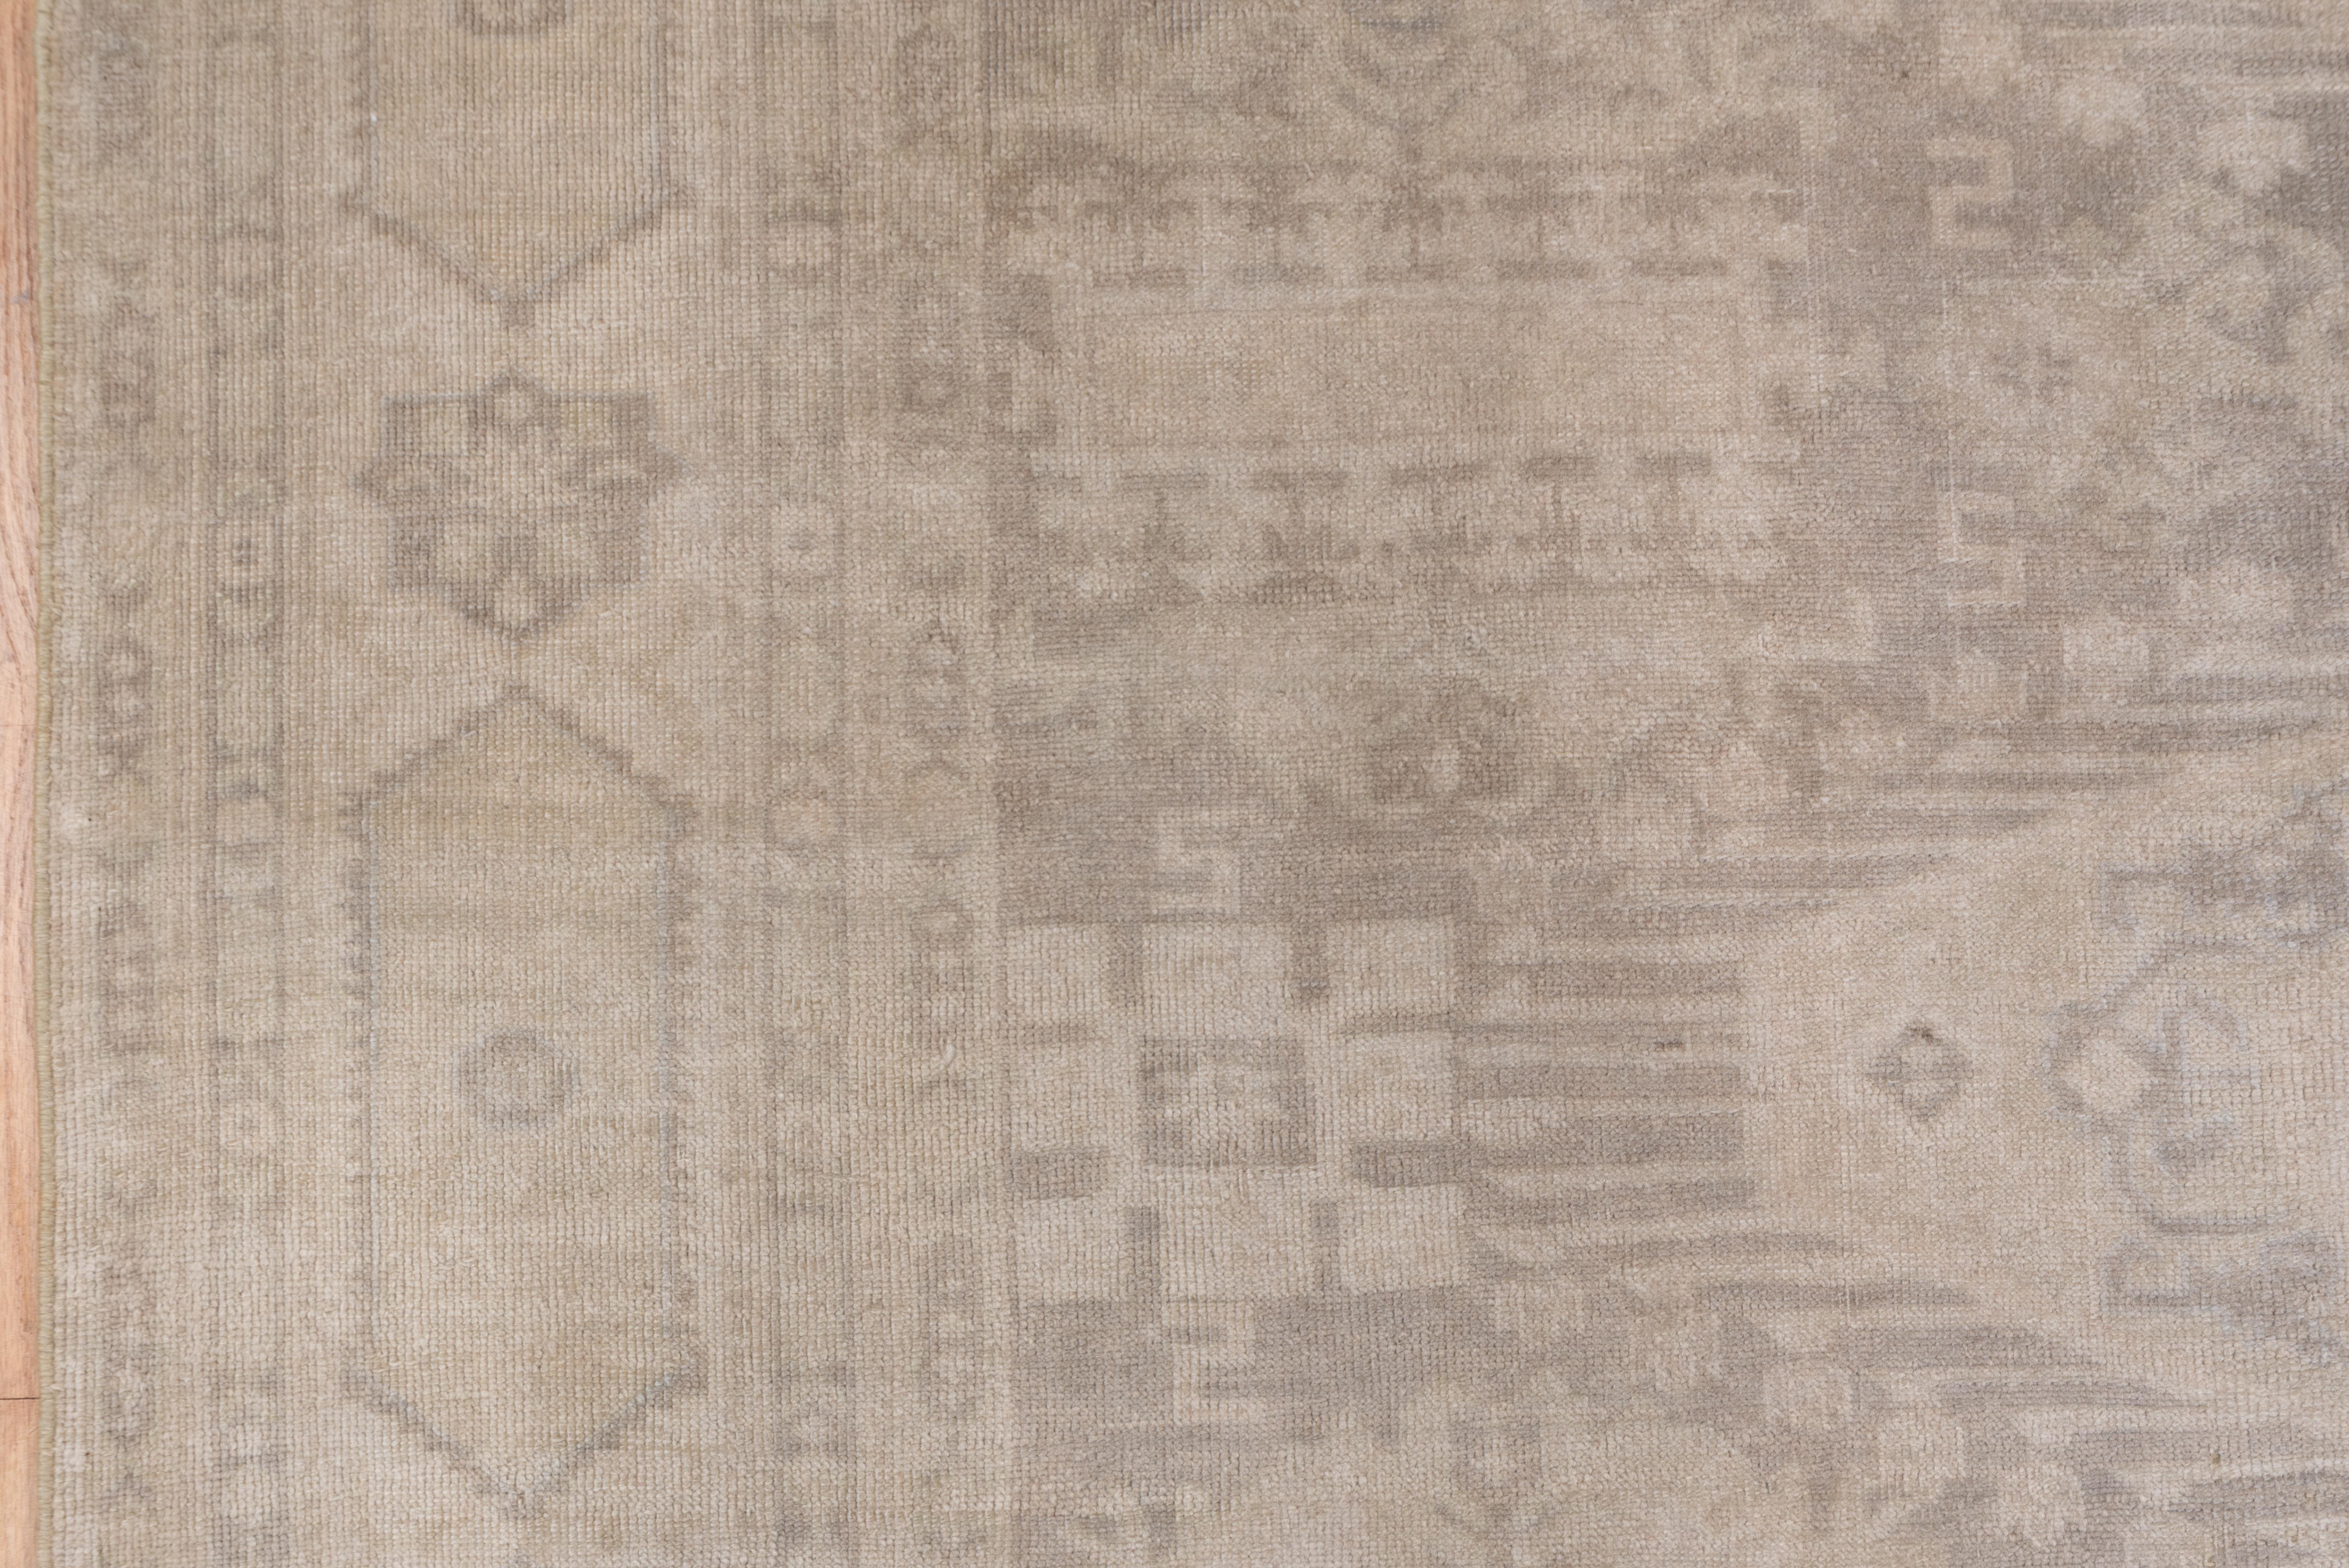 Mid-20th Century Antique Gray Turkish Sivas Rug, Gray Field, Ivory Borders For Sale